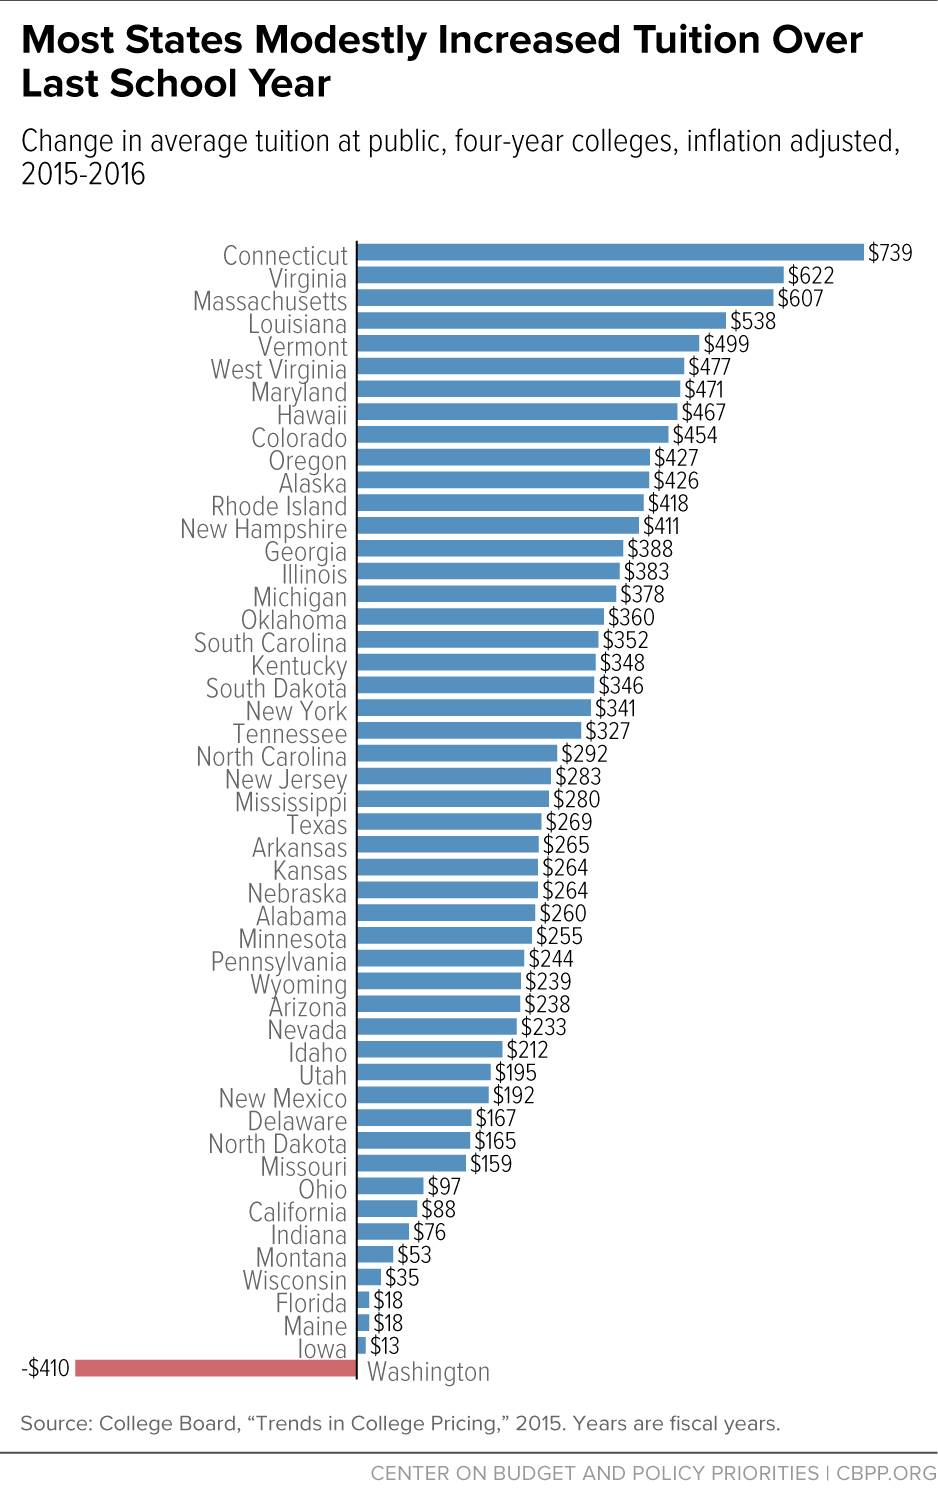 Most States Modestly Increased Tuition Over Last School Year